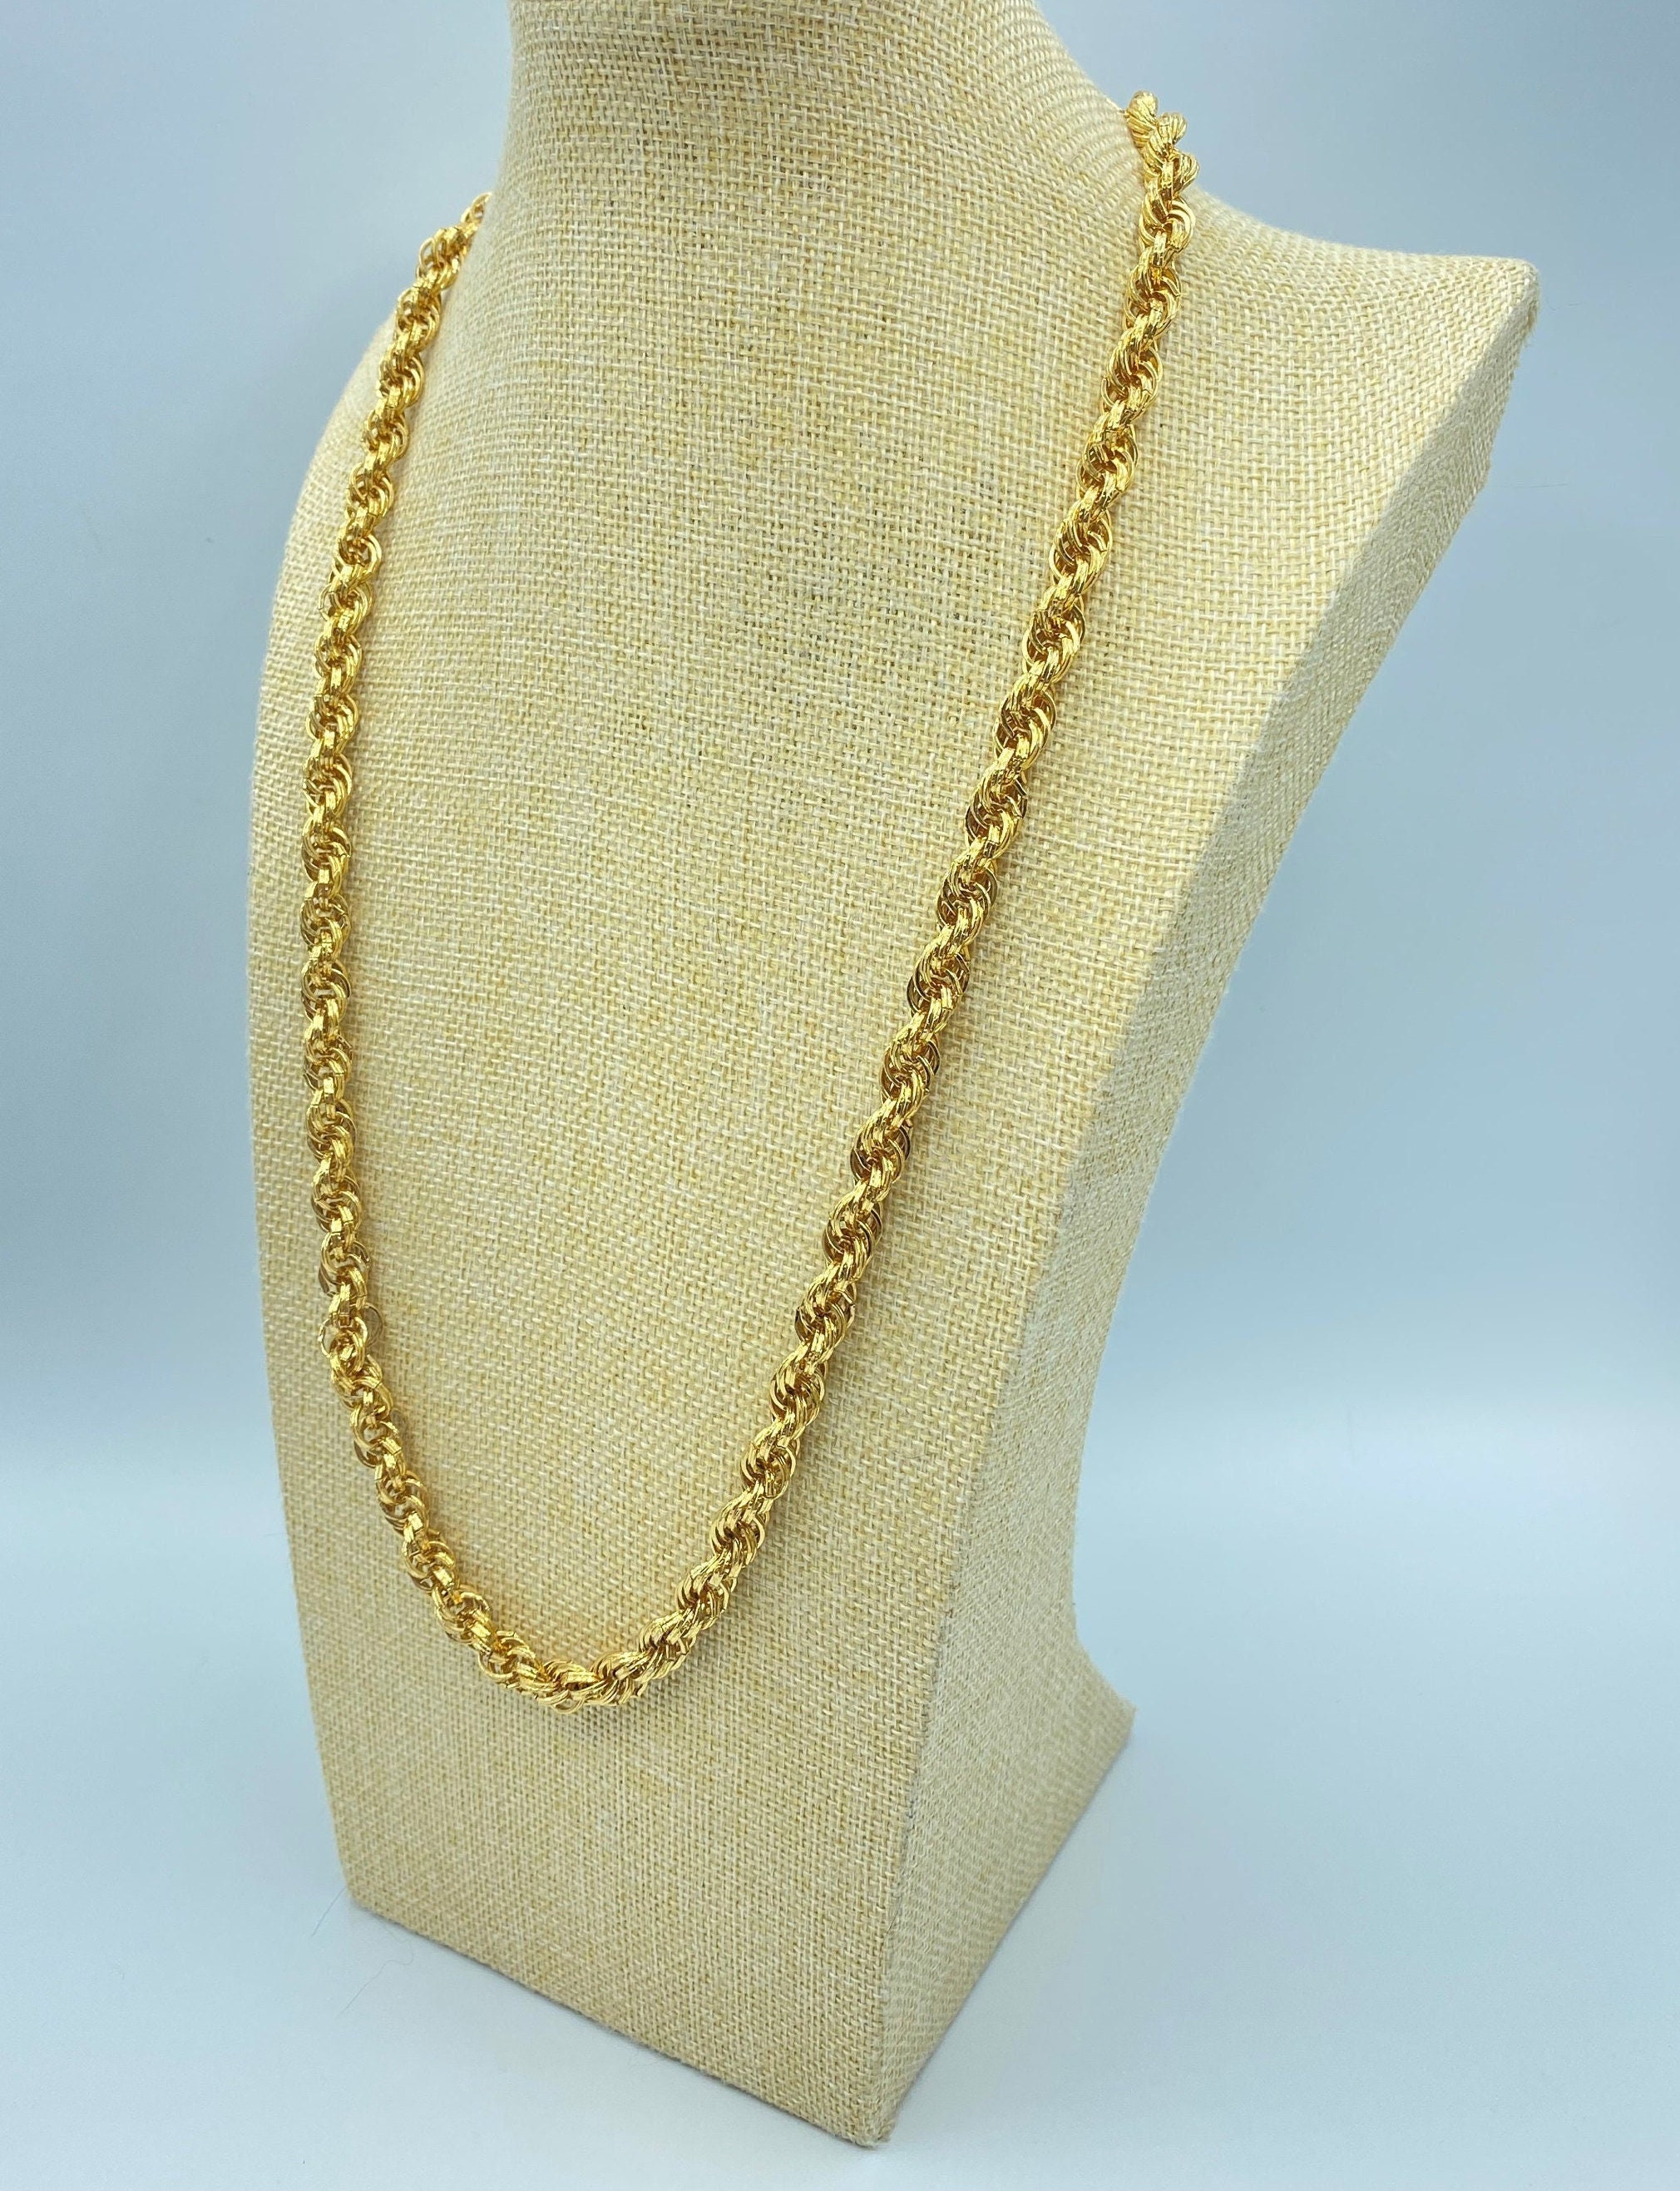 Monet Large Link Chain Necklace, Shiny Gold Tone Metal, Spring Ring Clasp,  17.75 Long, .25 Wide - Etsy | Chain link necklace, Spring rings, Gold tone  metal